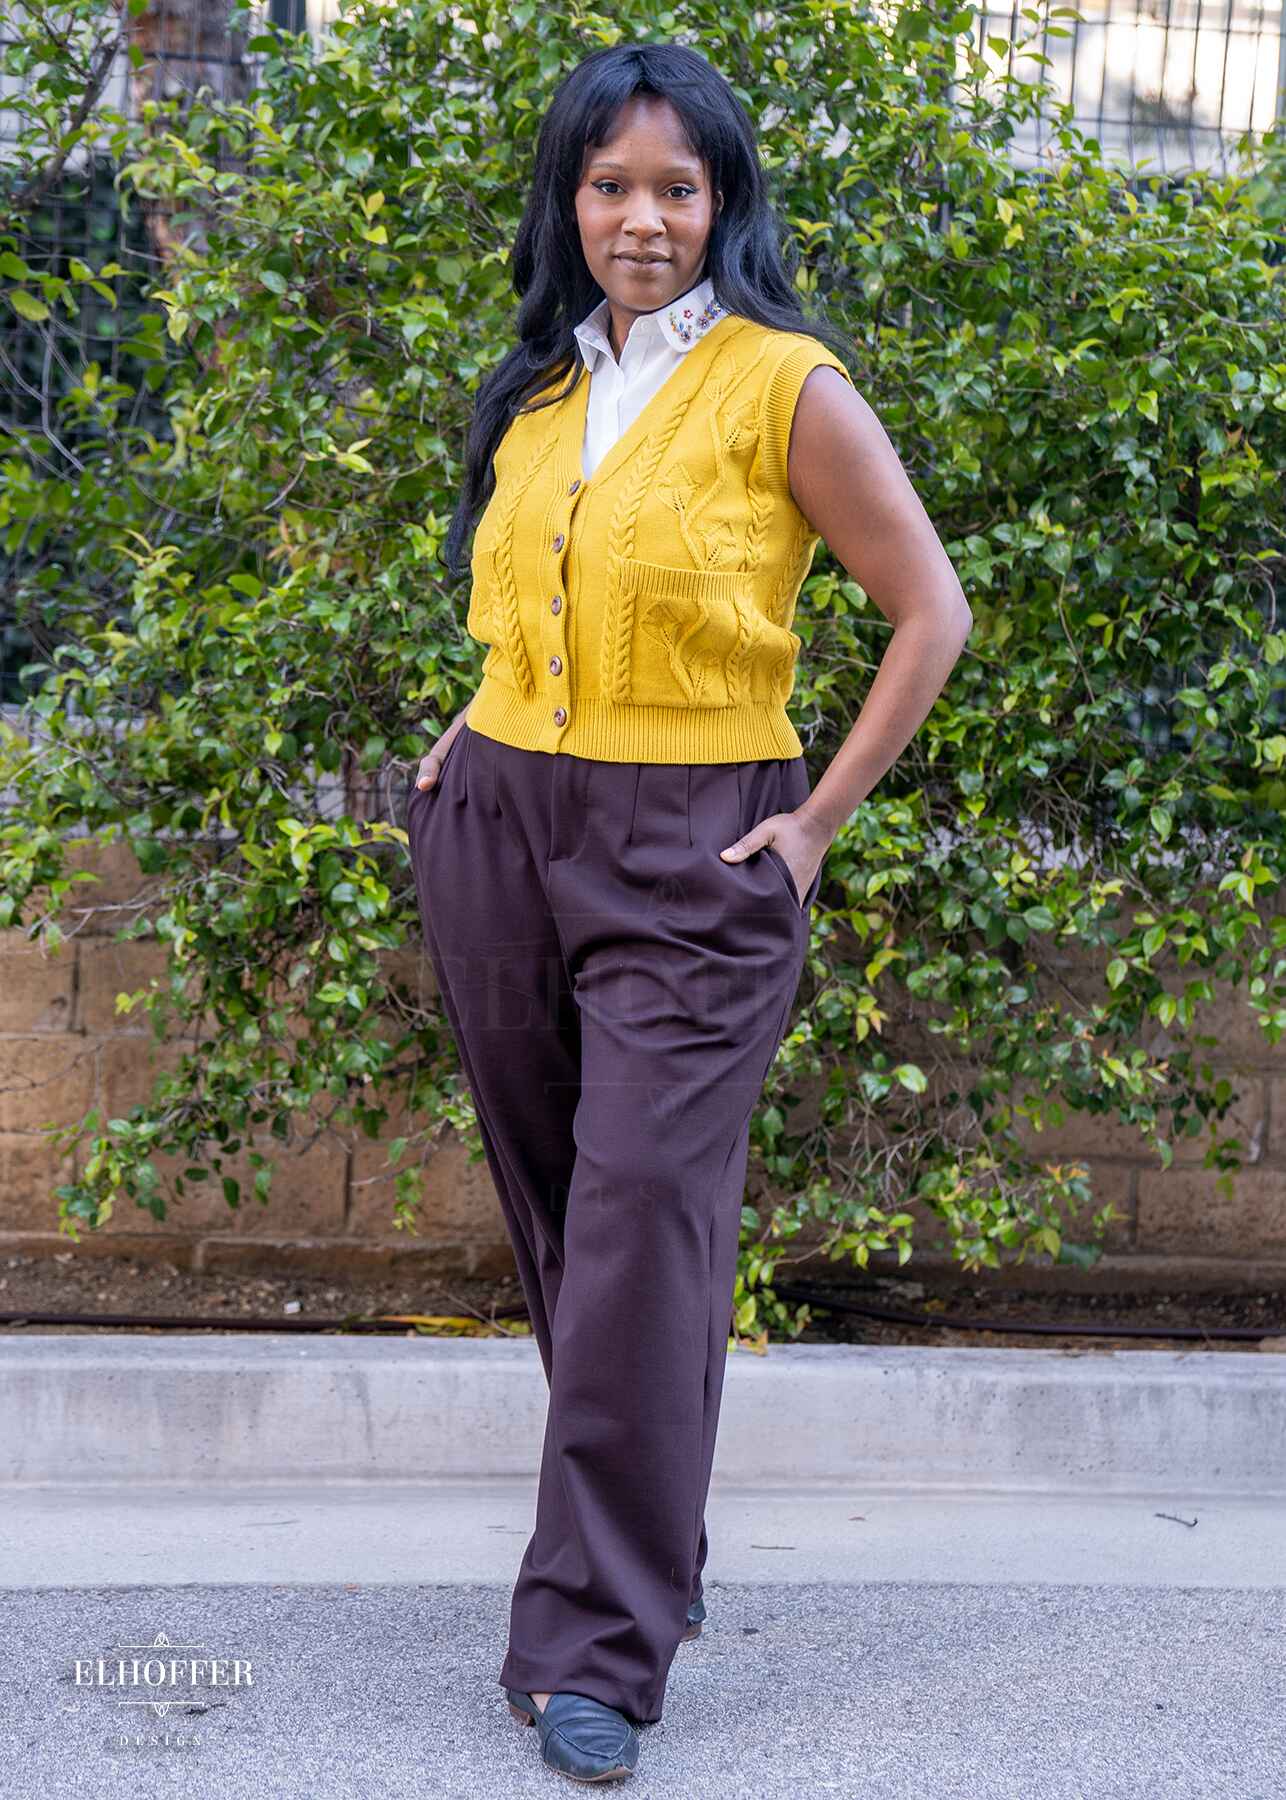 Lynsi, a medium dark skinned model with long black hair, is wearing chocolate brown wide leg trousers. The trousers feature a front zipper and button closure, pleated front, side pockets, and elastic in the back of the waistband for adjustability and cinch. She paired the trousers with a yellow knit vest with a leafy vine and cable knit design.